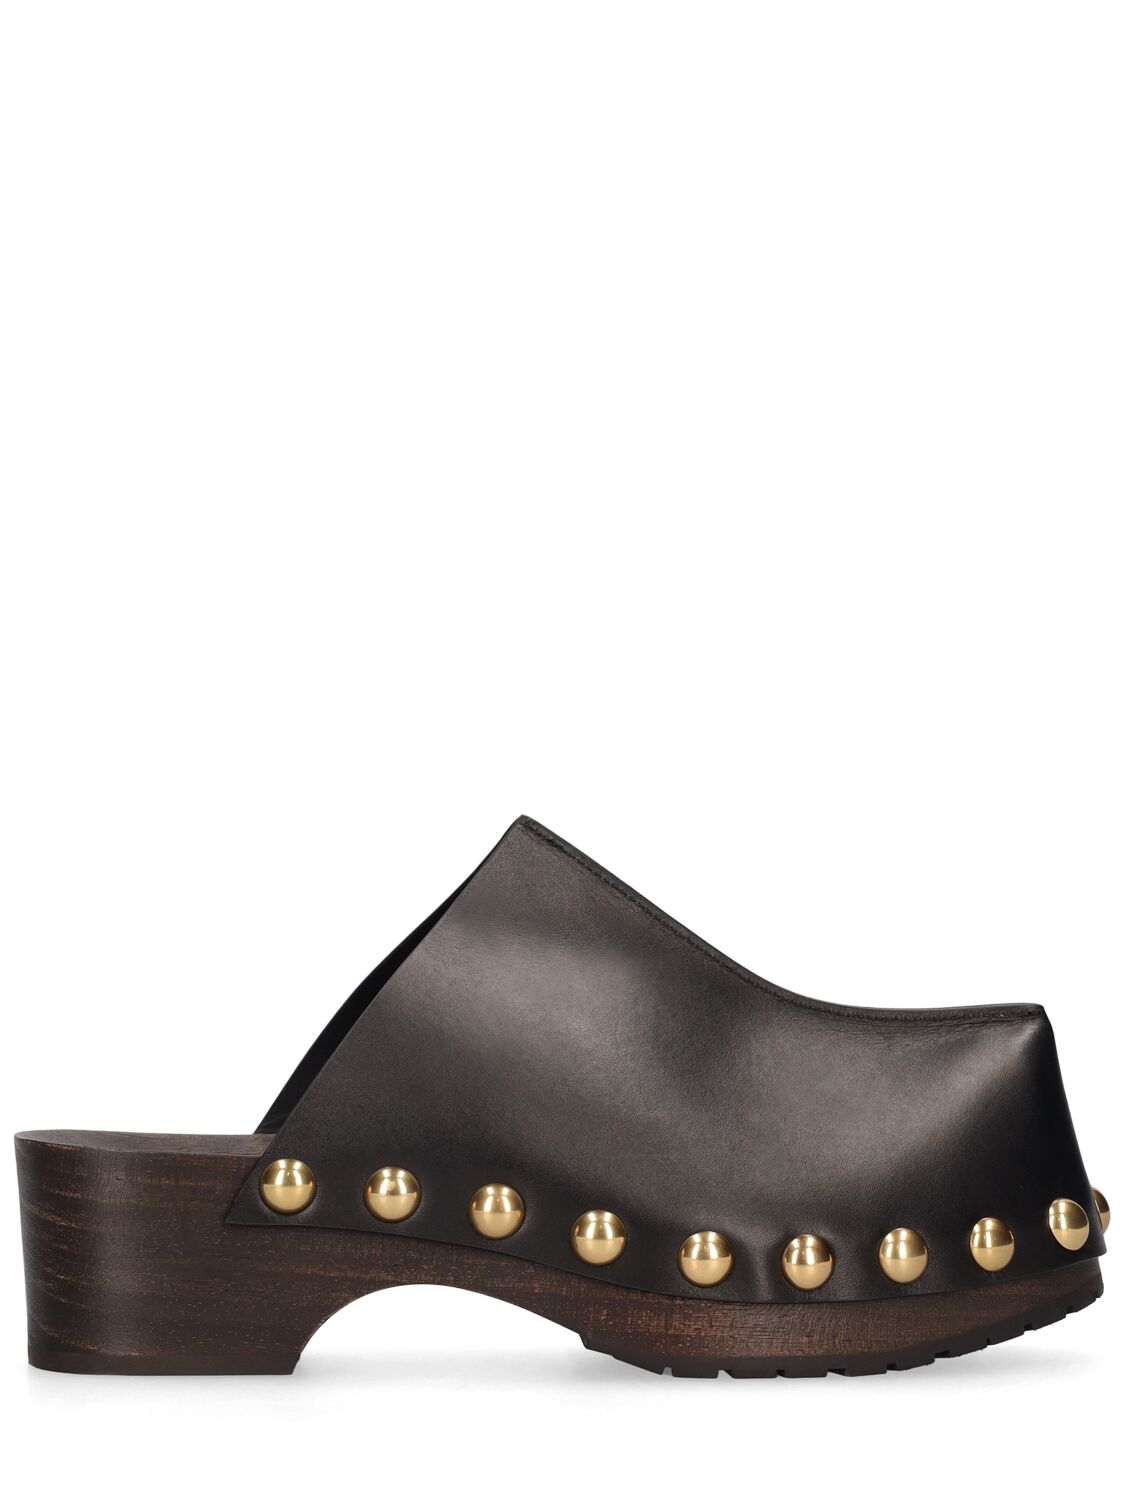 Etro Leather Clogs W/ Studs In Black